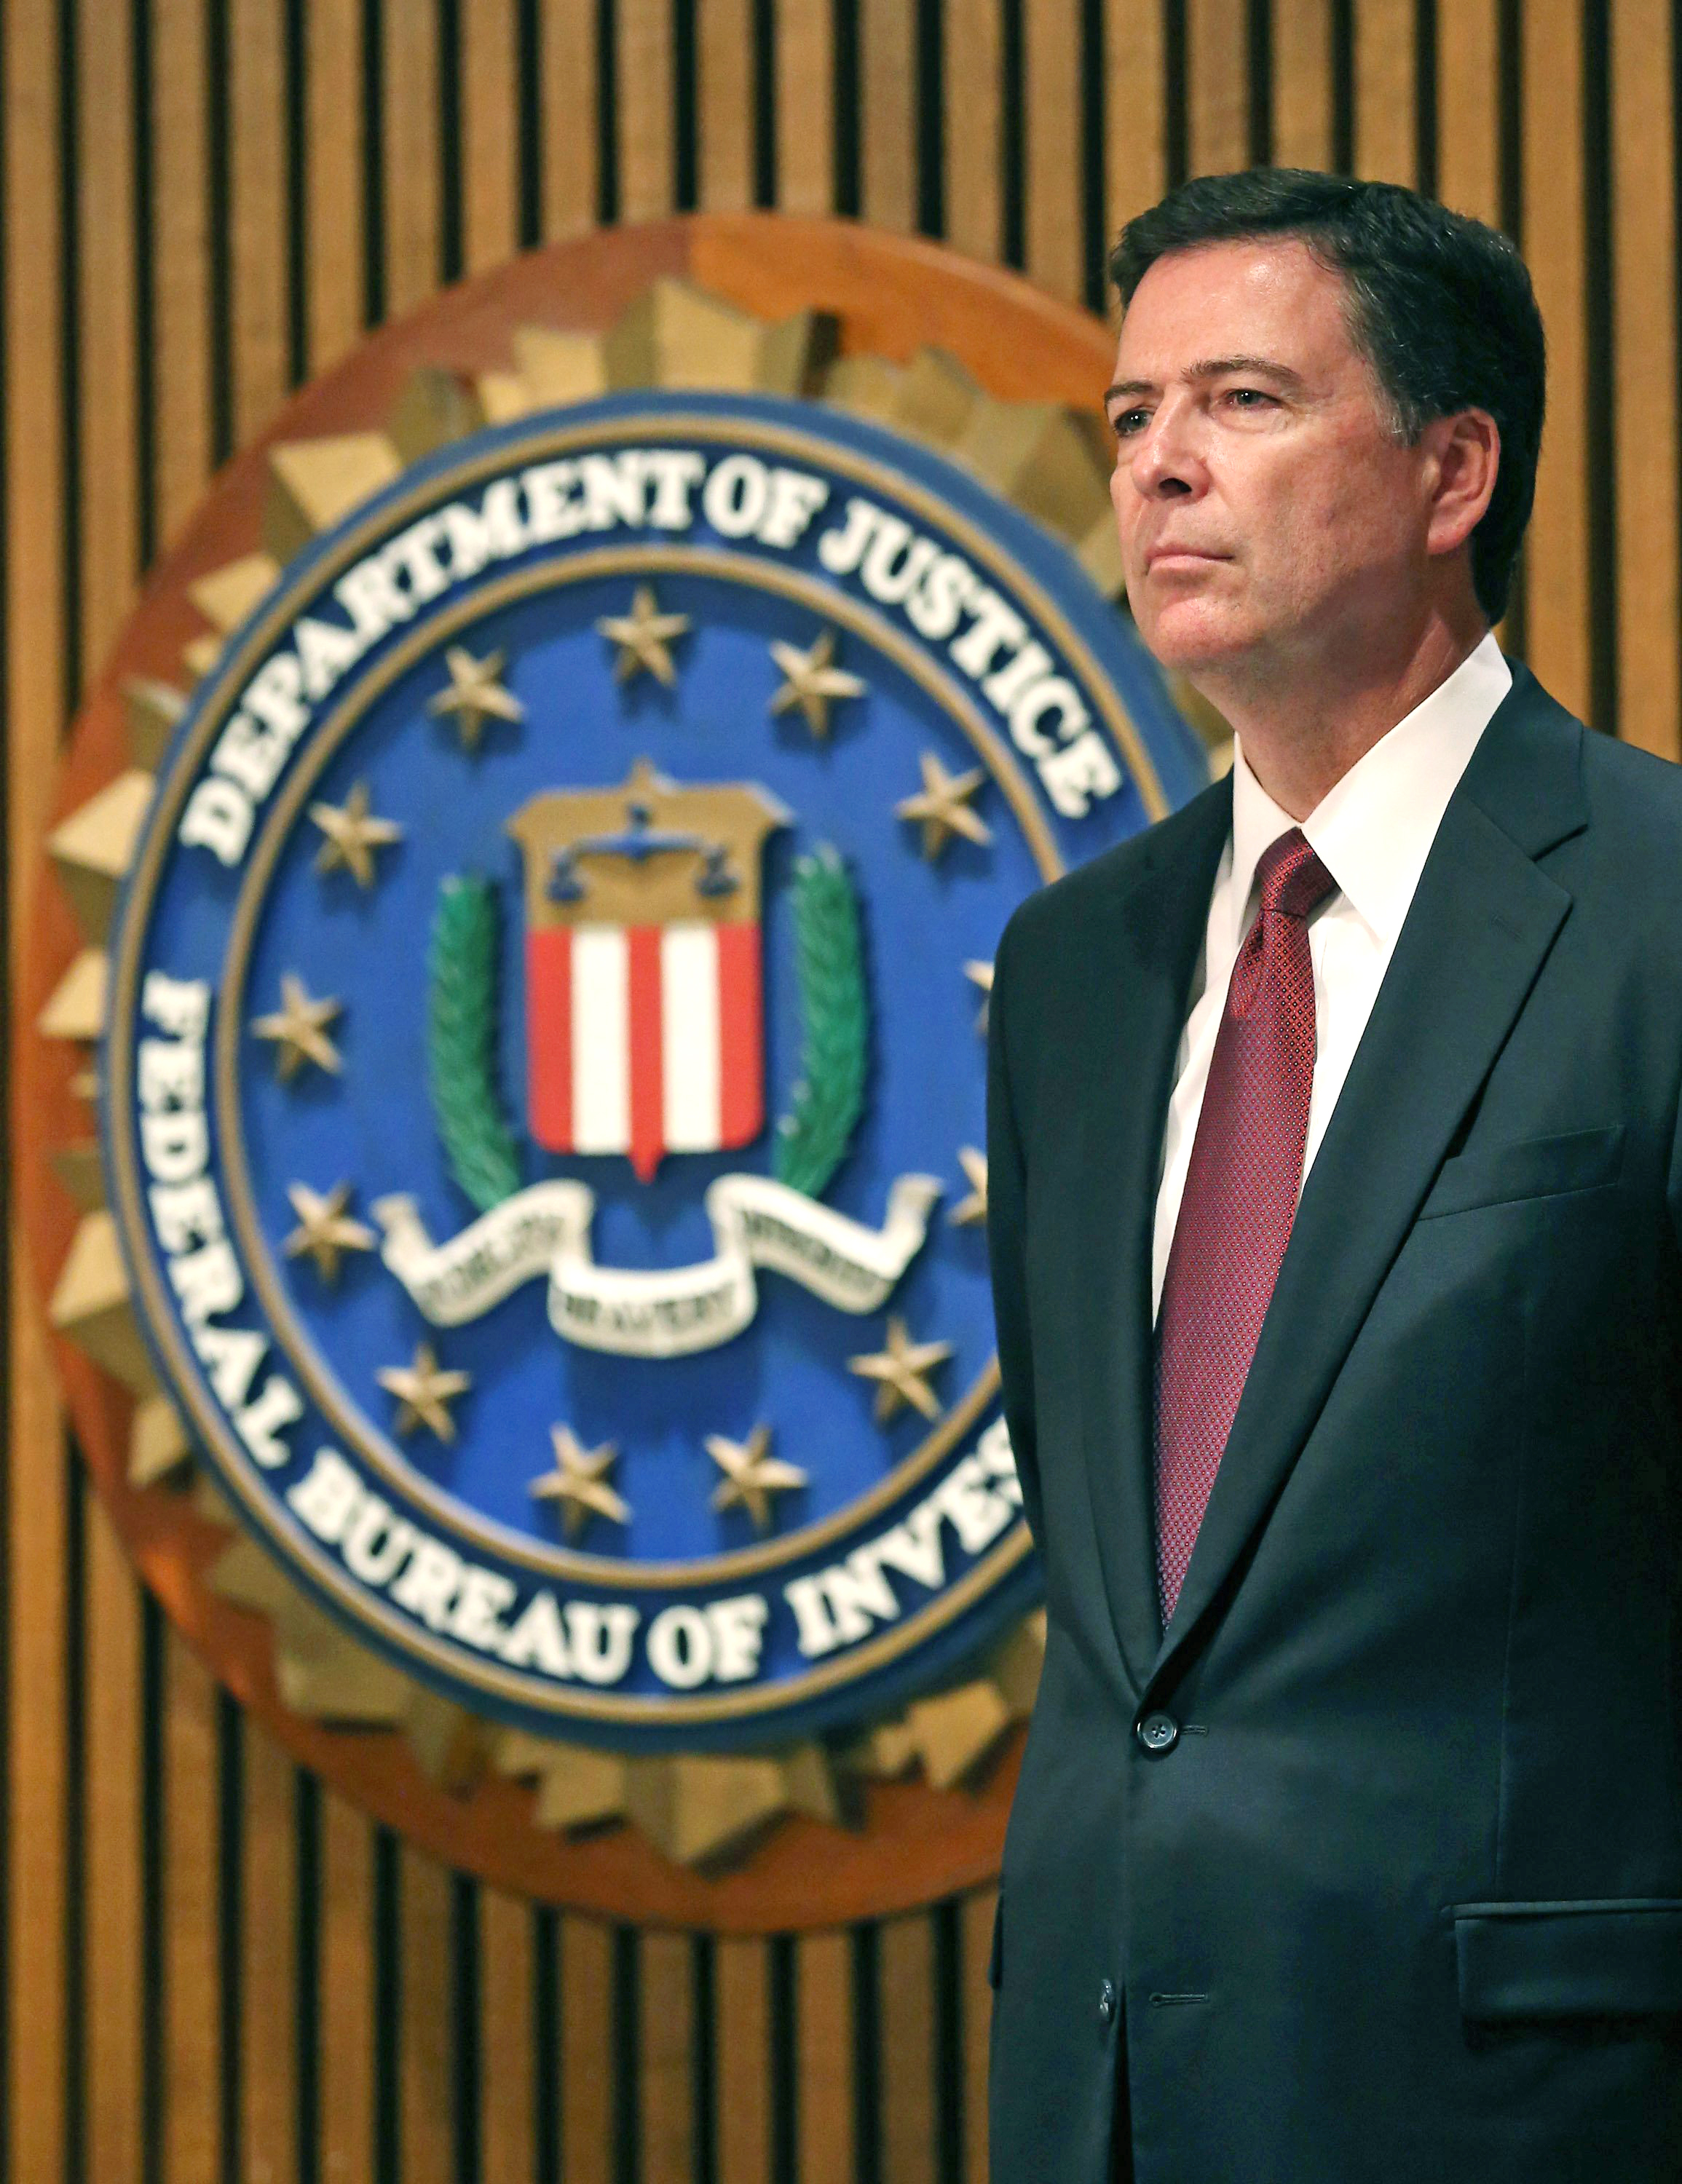 FBI Director James Comey participates in a news conference on child sex trafficking, at FBI headquarters, June 23, 2014 in Washington, D.C.